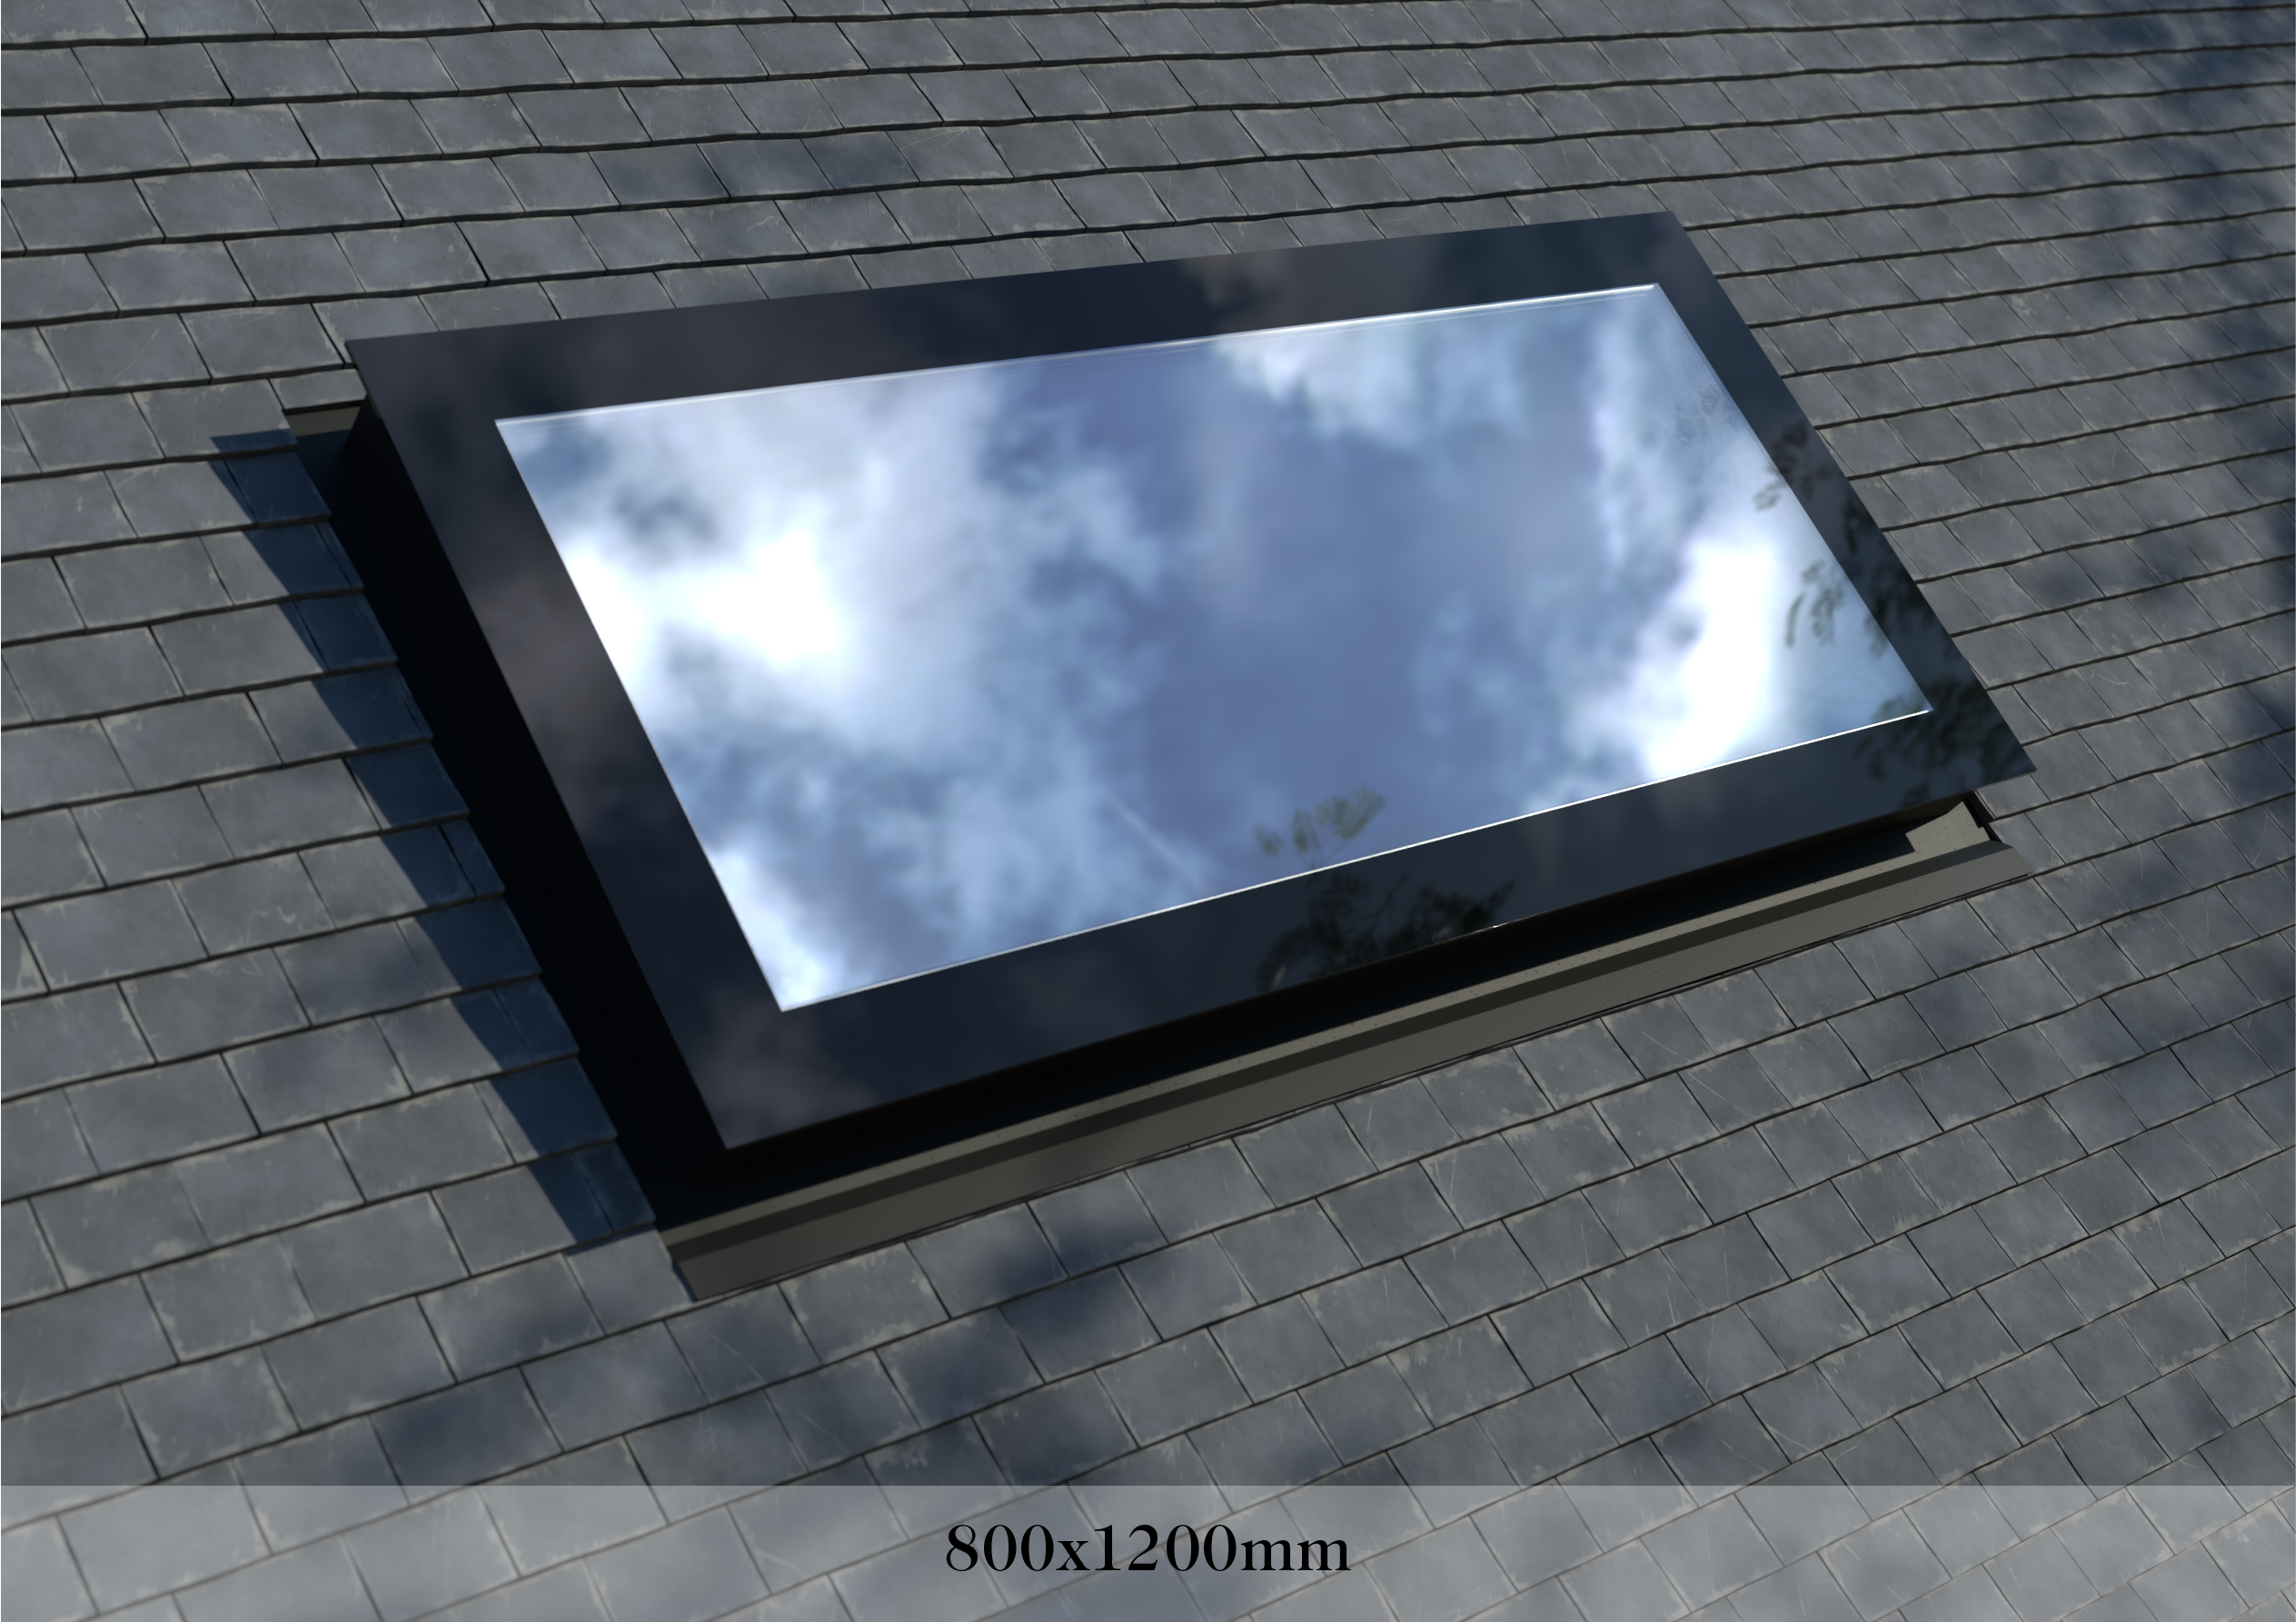 Pitched Roof Skylight 800 x 1200mm